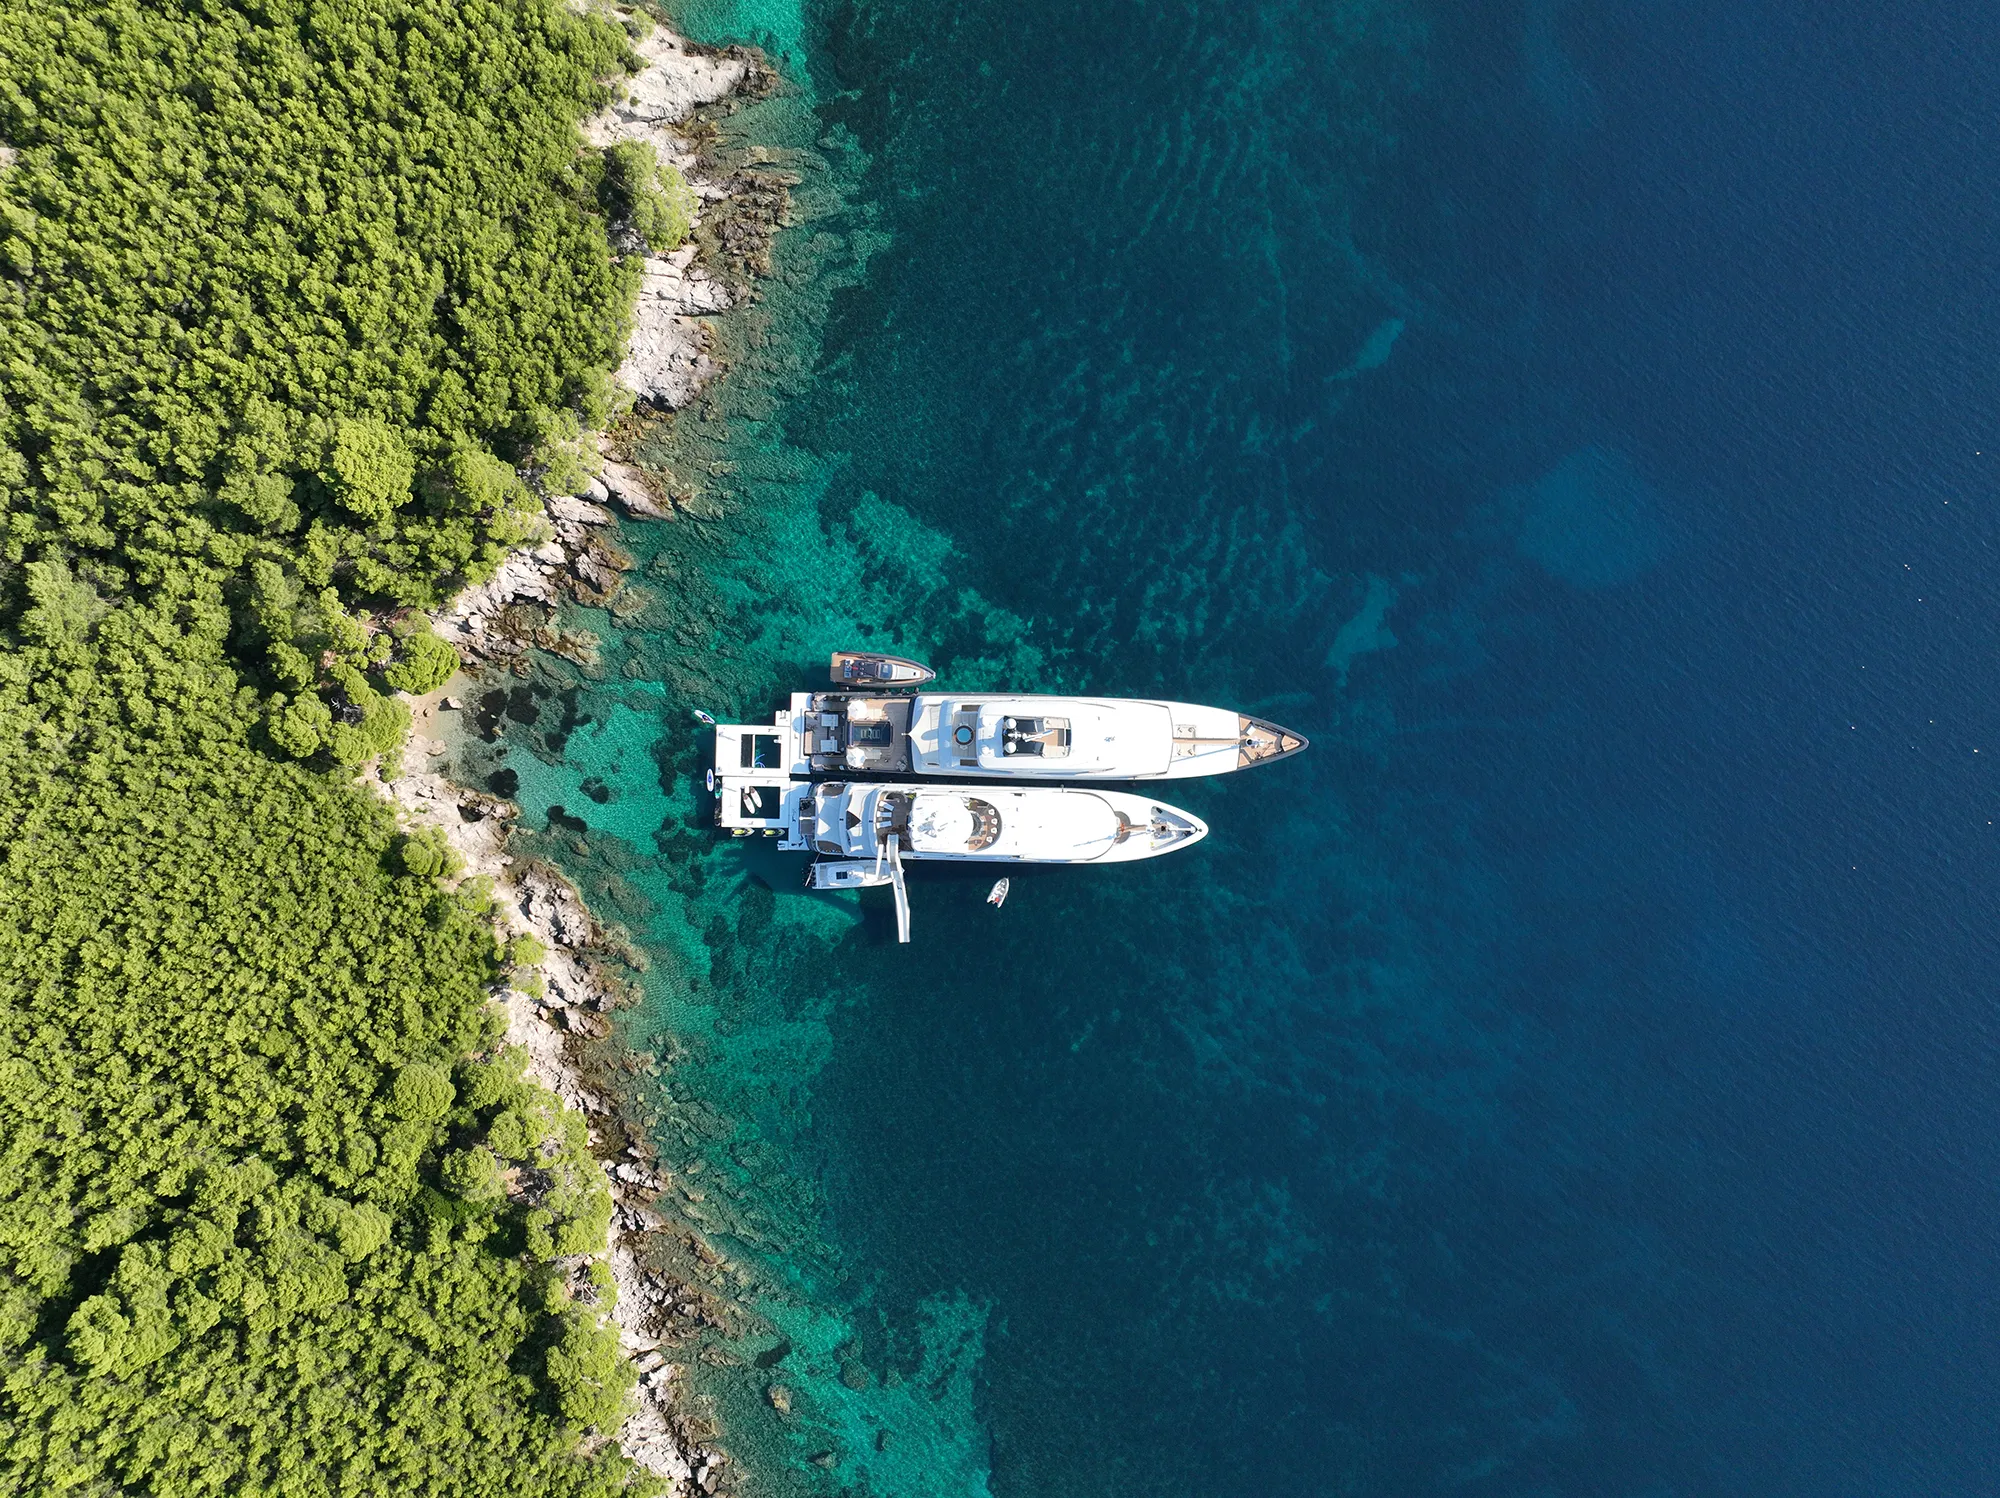 Drone view of the Sea Pools and Yacht Slide on MY Loon 221 and Loon 180 in tandem in Croatia